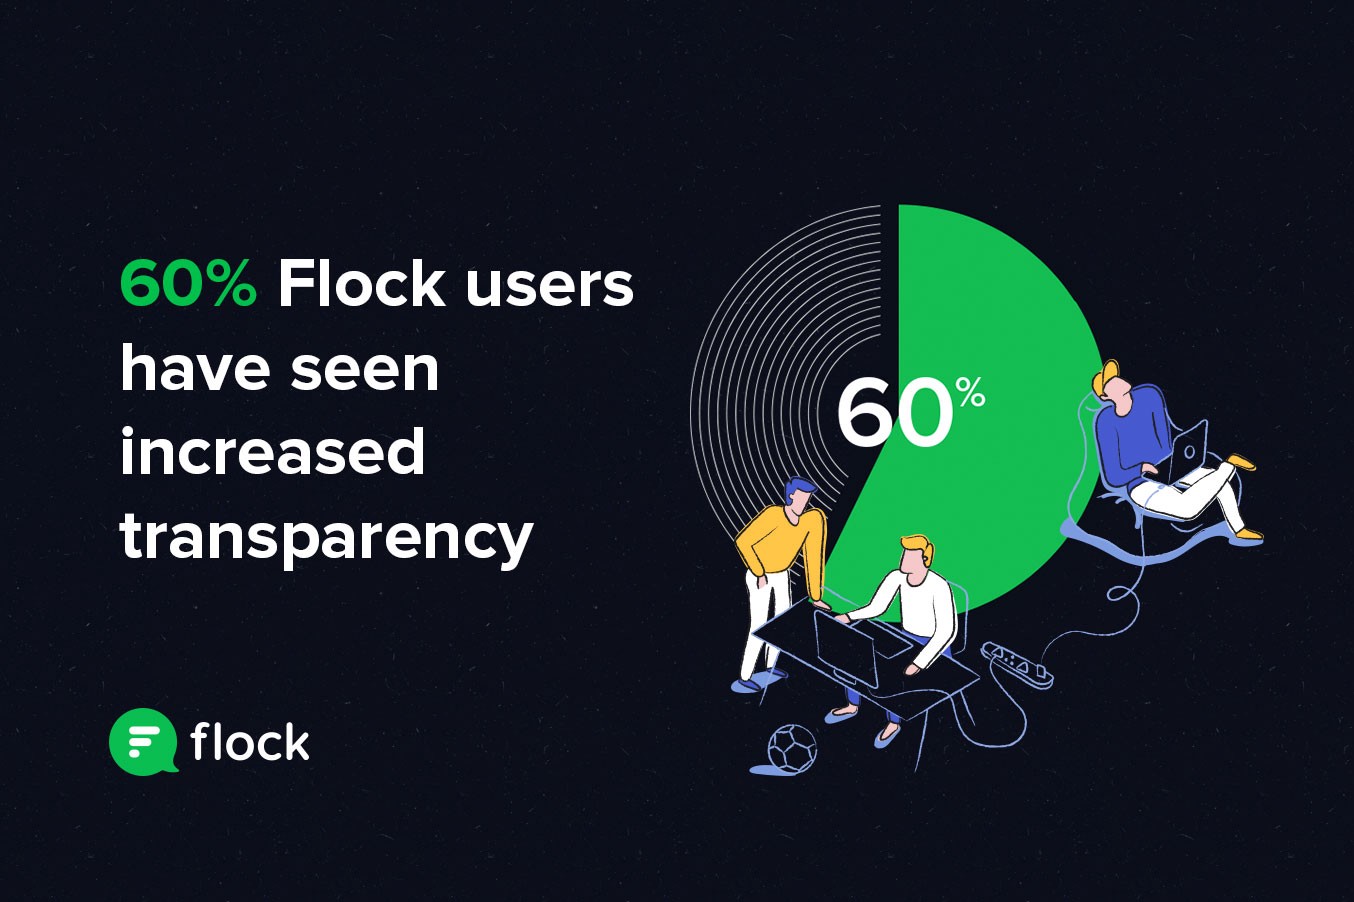 Graphic: 60% of Flock users have seen increased transparency